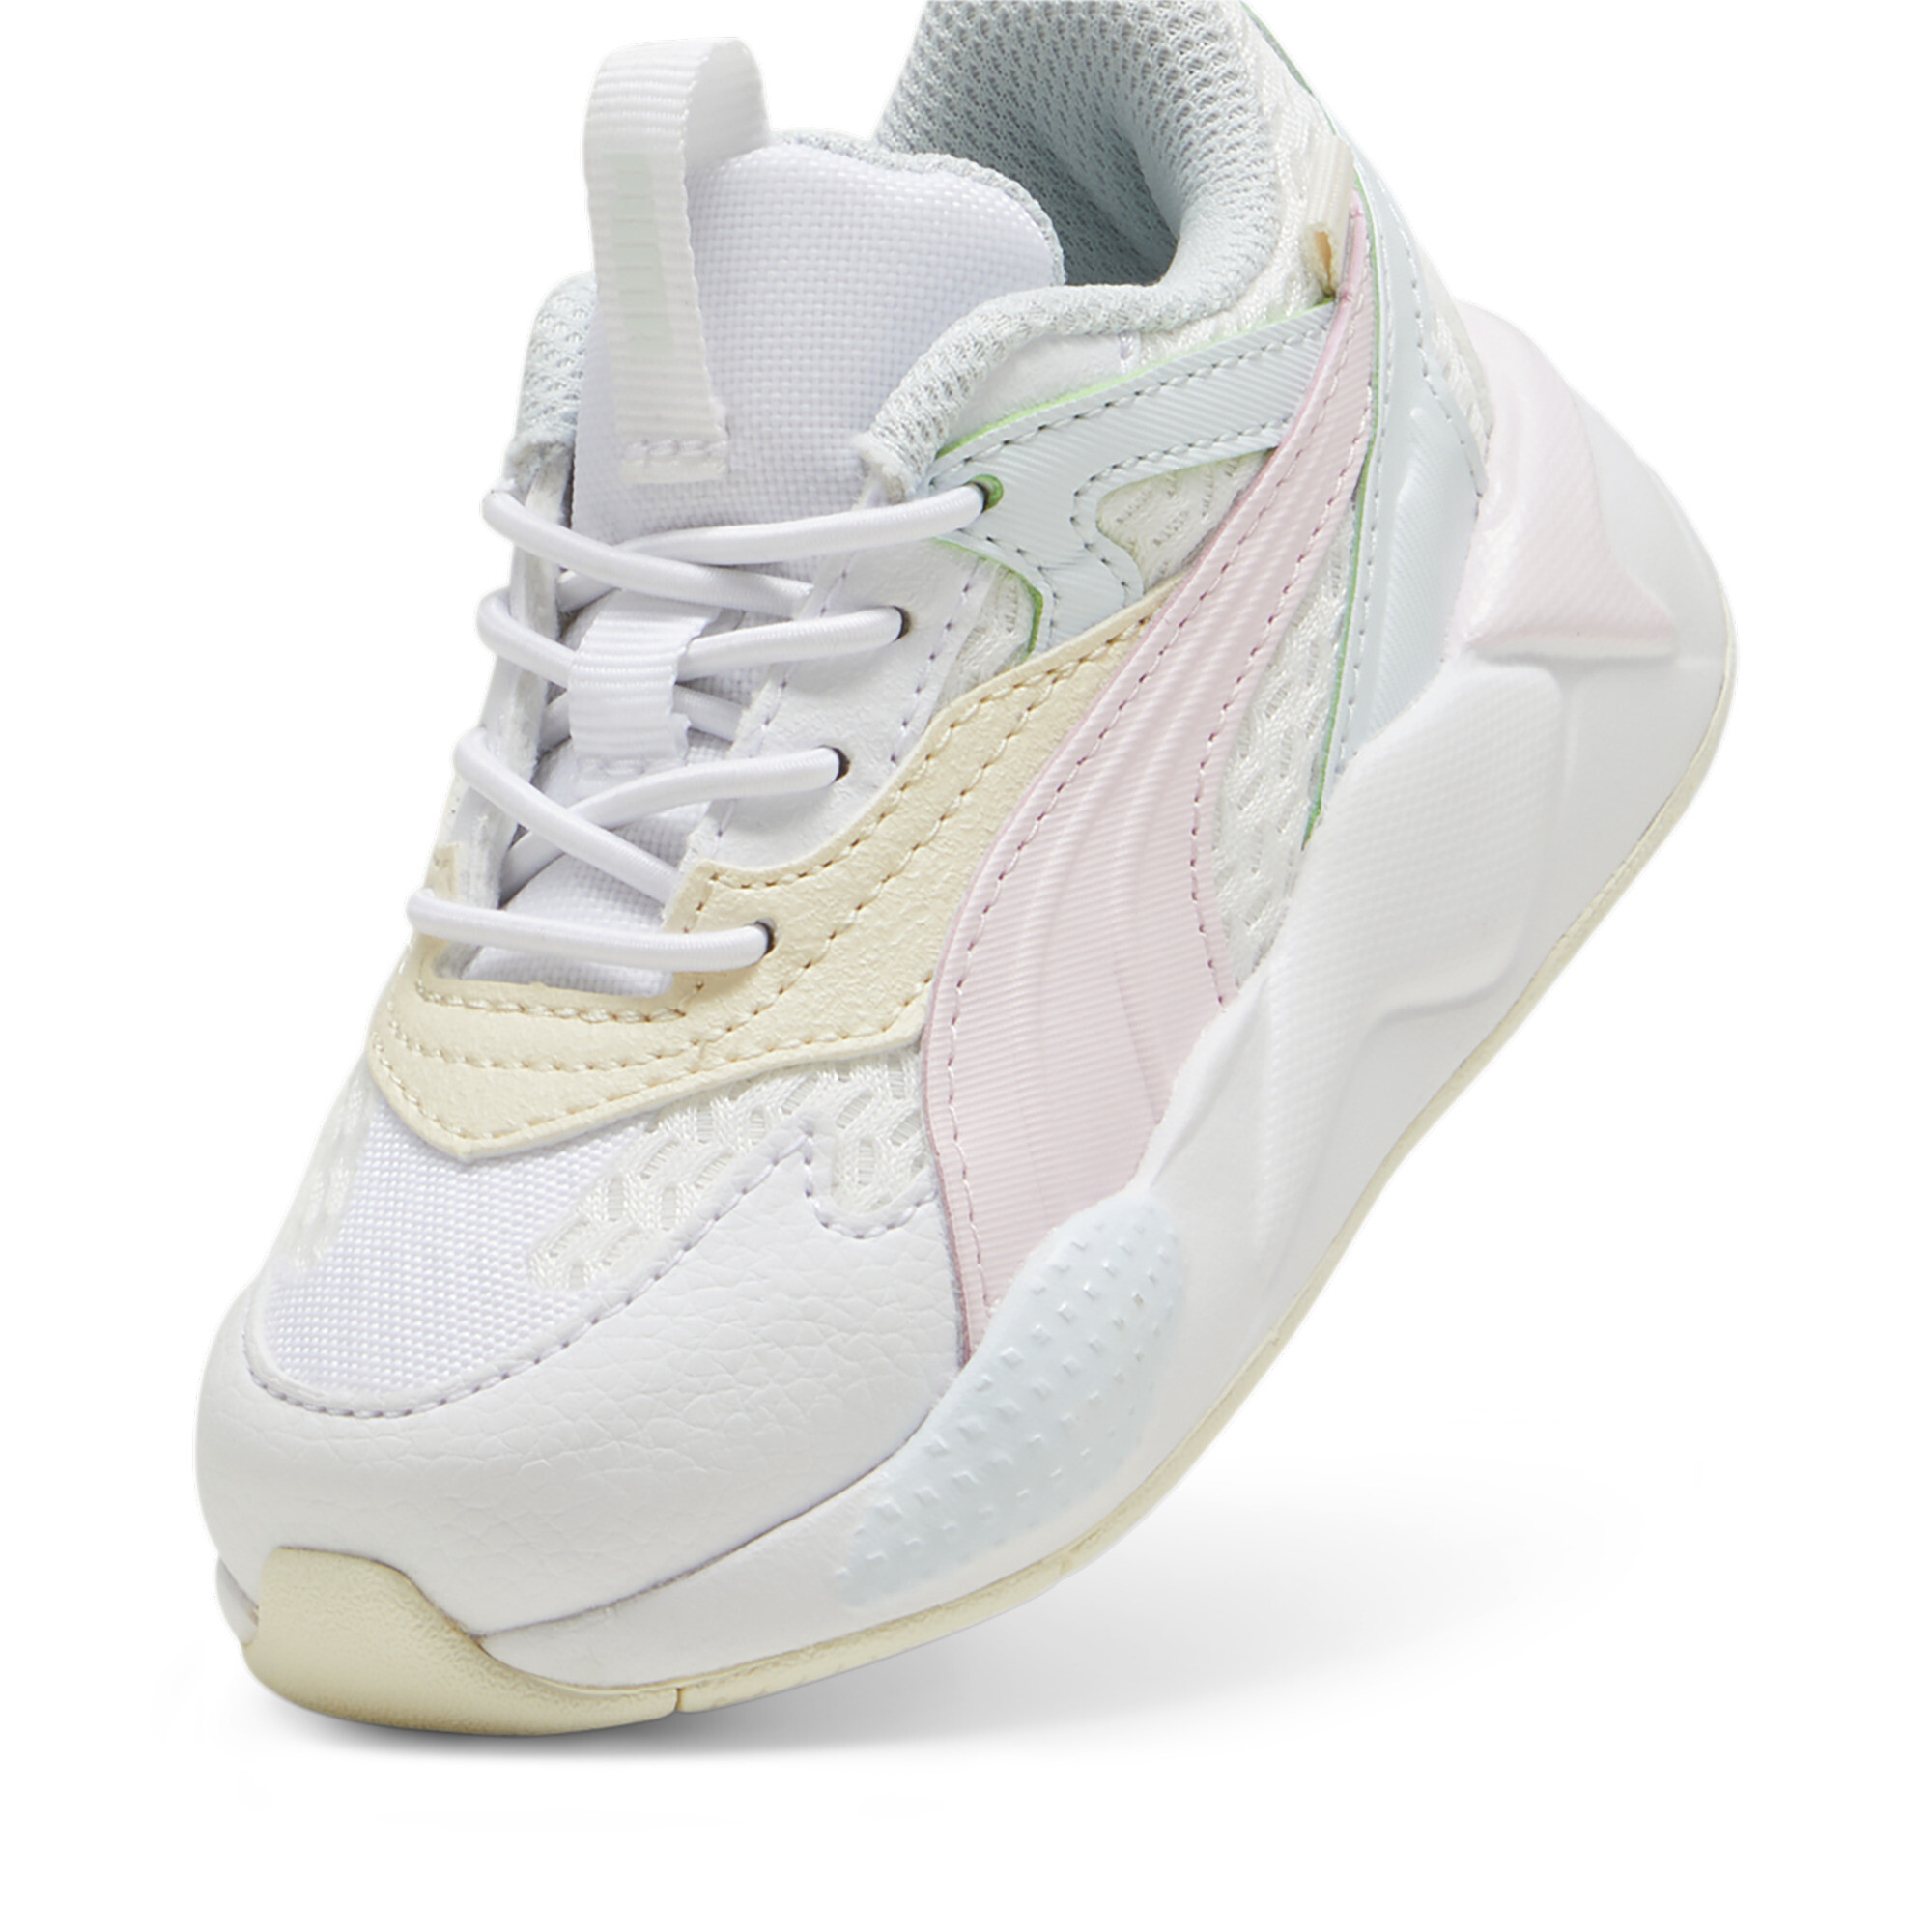 Puma RS-X Efekt Toddlers' Sneakers, White, Size 19, Shoes